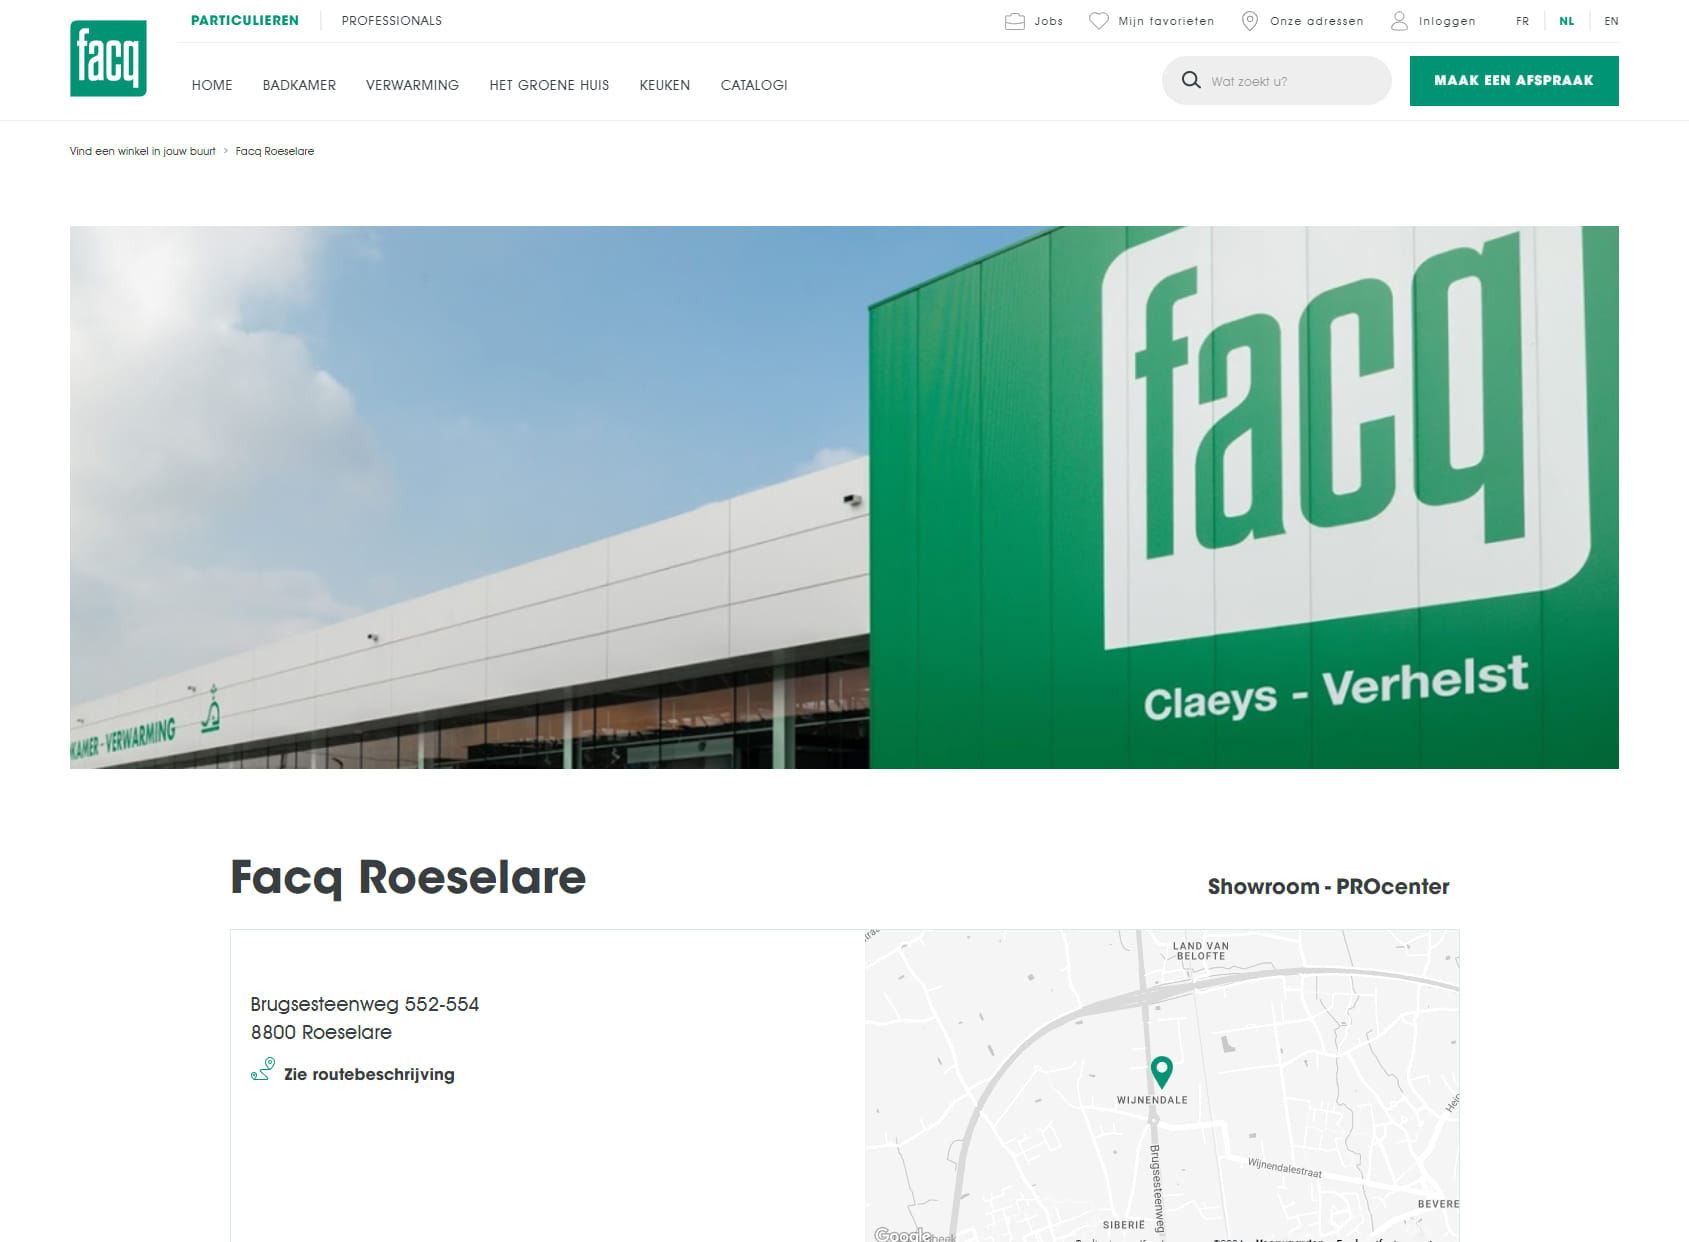 Facq Roeselare